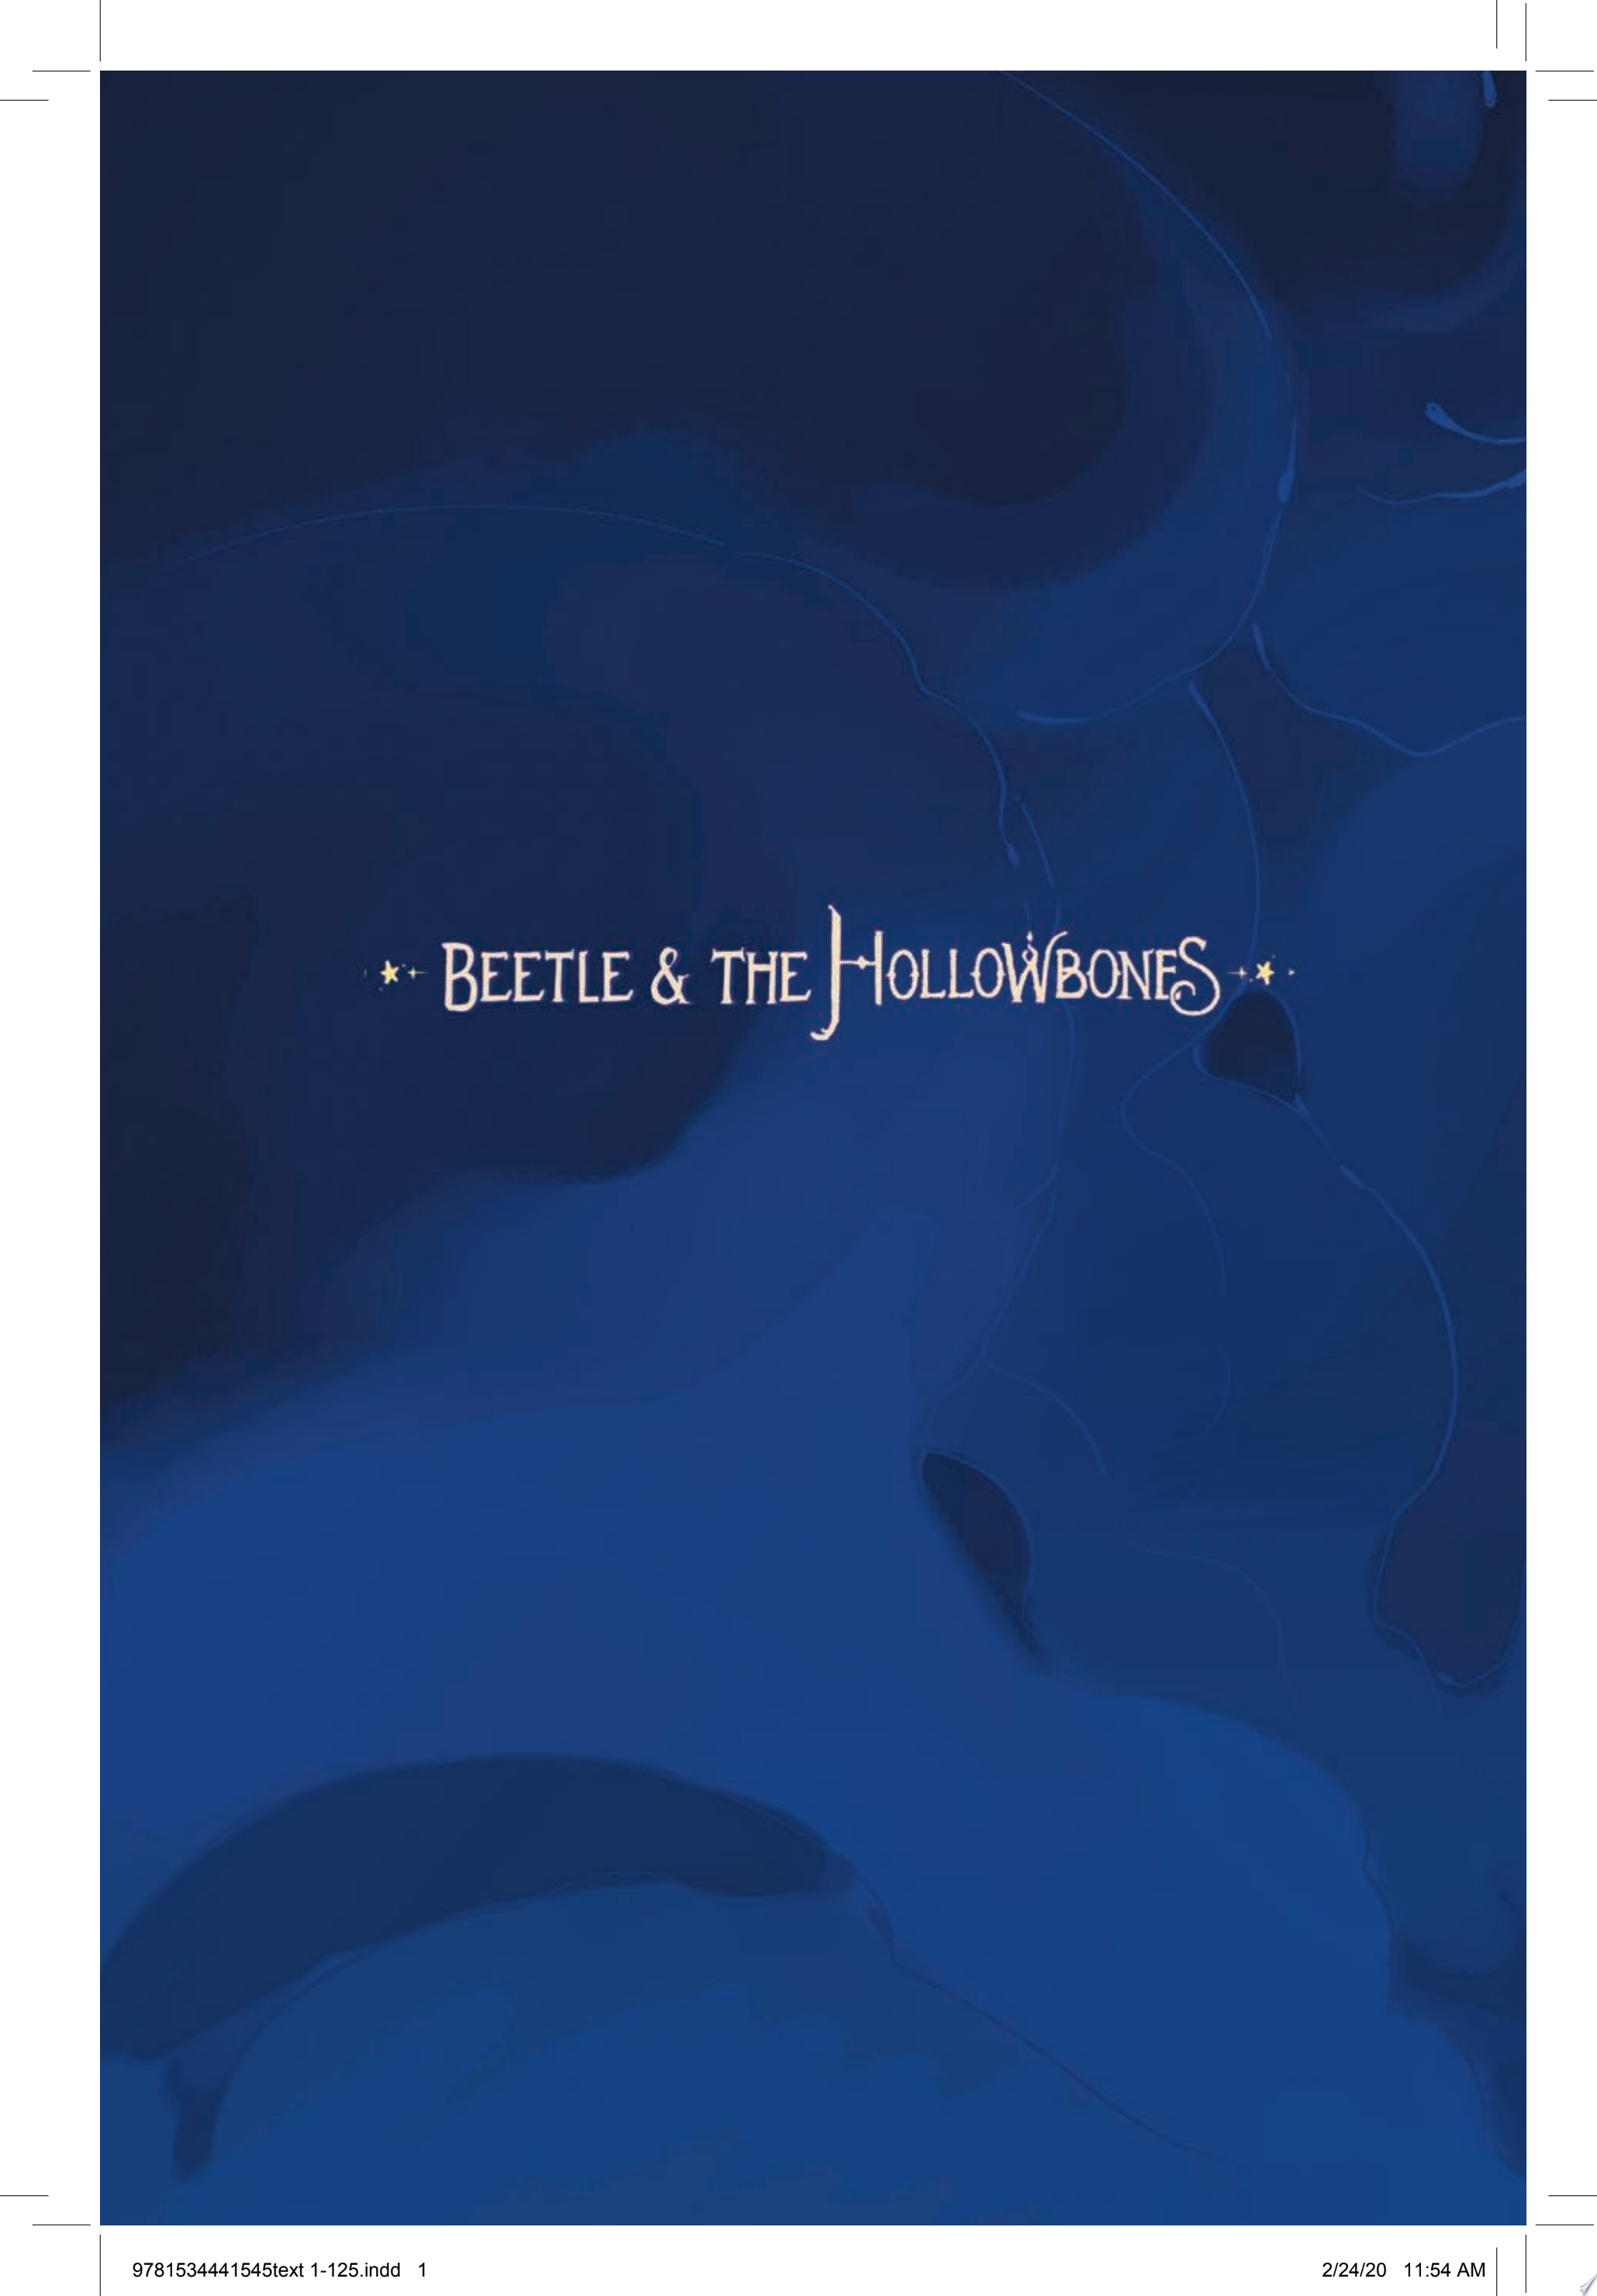 Image for "Beetle and the Hollowbones"